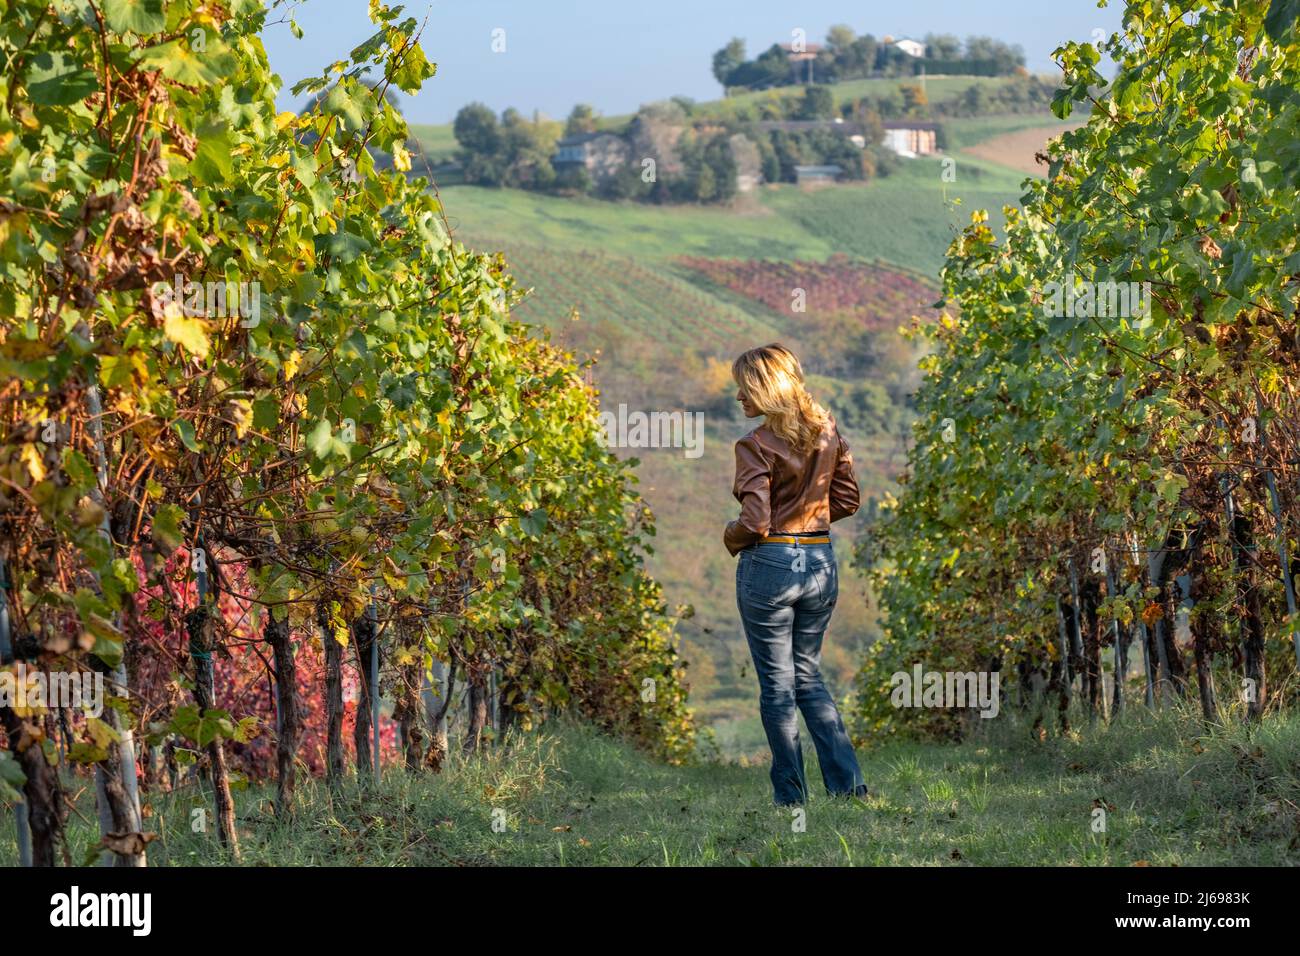 Woman in a brown jacket standing in the middle of a yellow vineyard in autumn, Castelvetro di Modena, Emilia Romagna, Italy, Europe Stock Photo